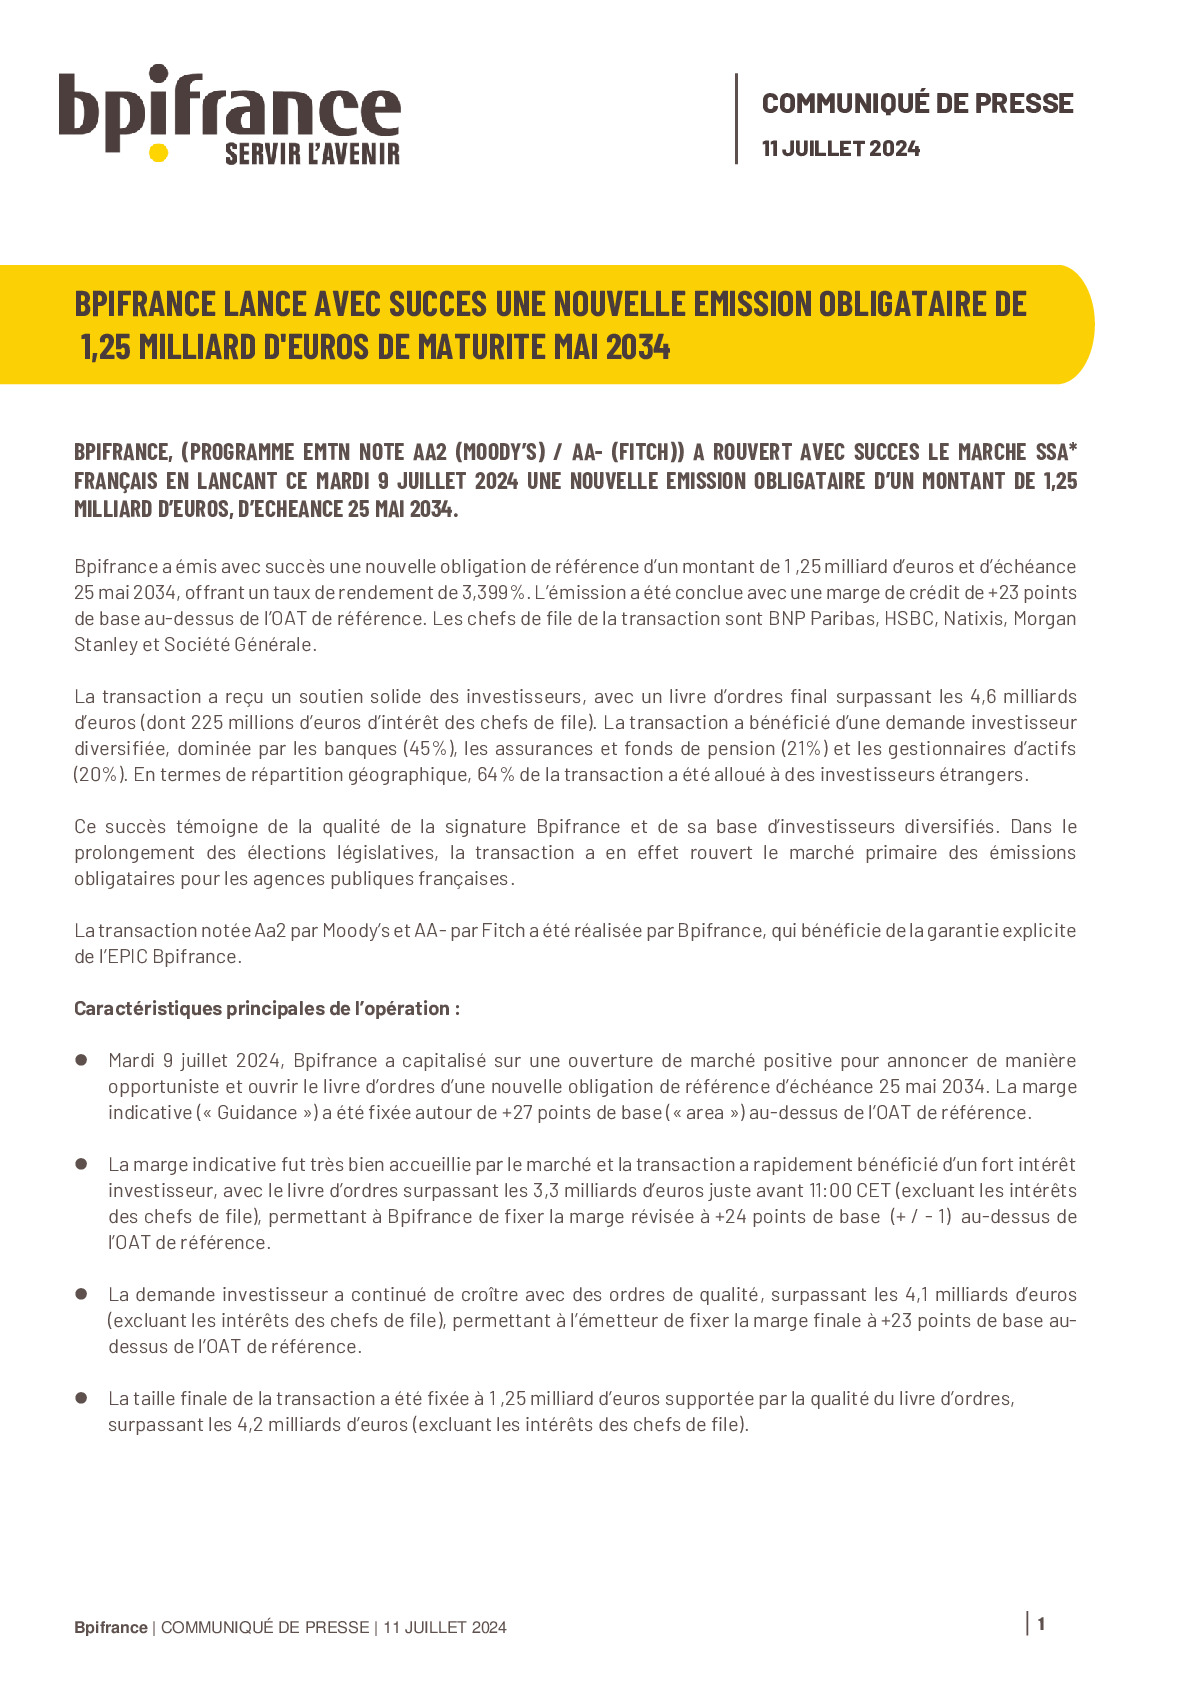 2024 07 11 – CP Emission Obligataire Bpifrance (FR) vdef